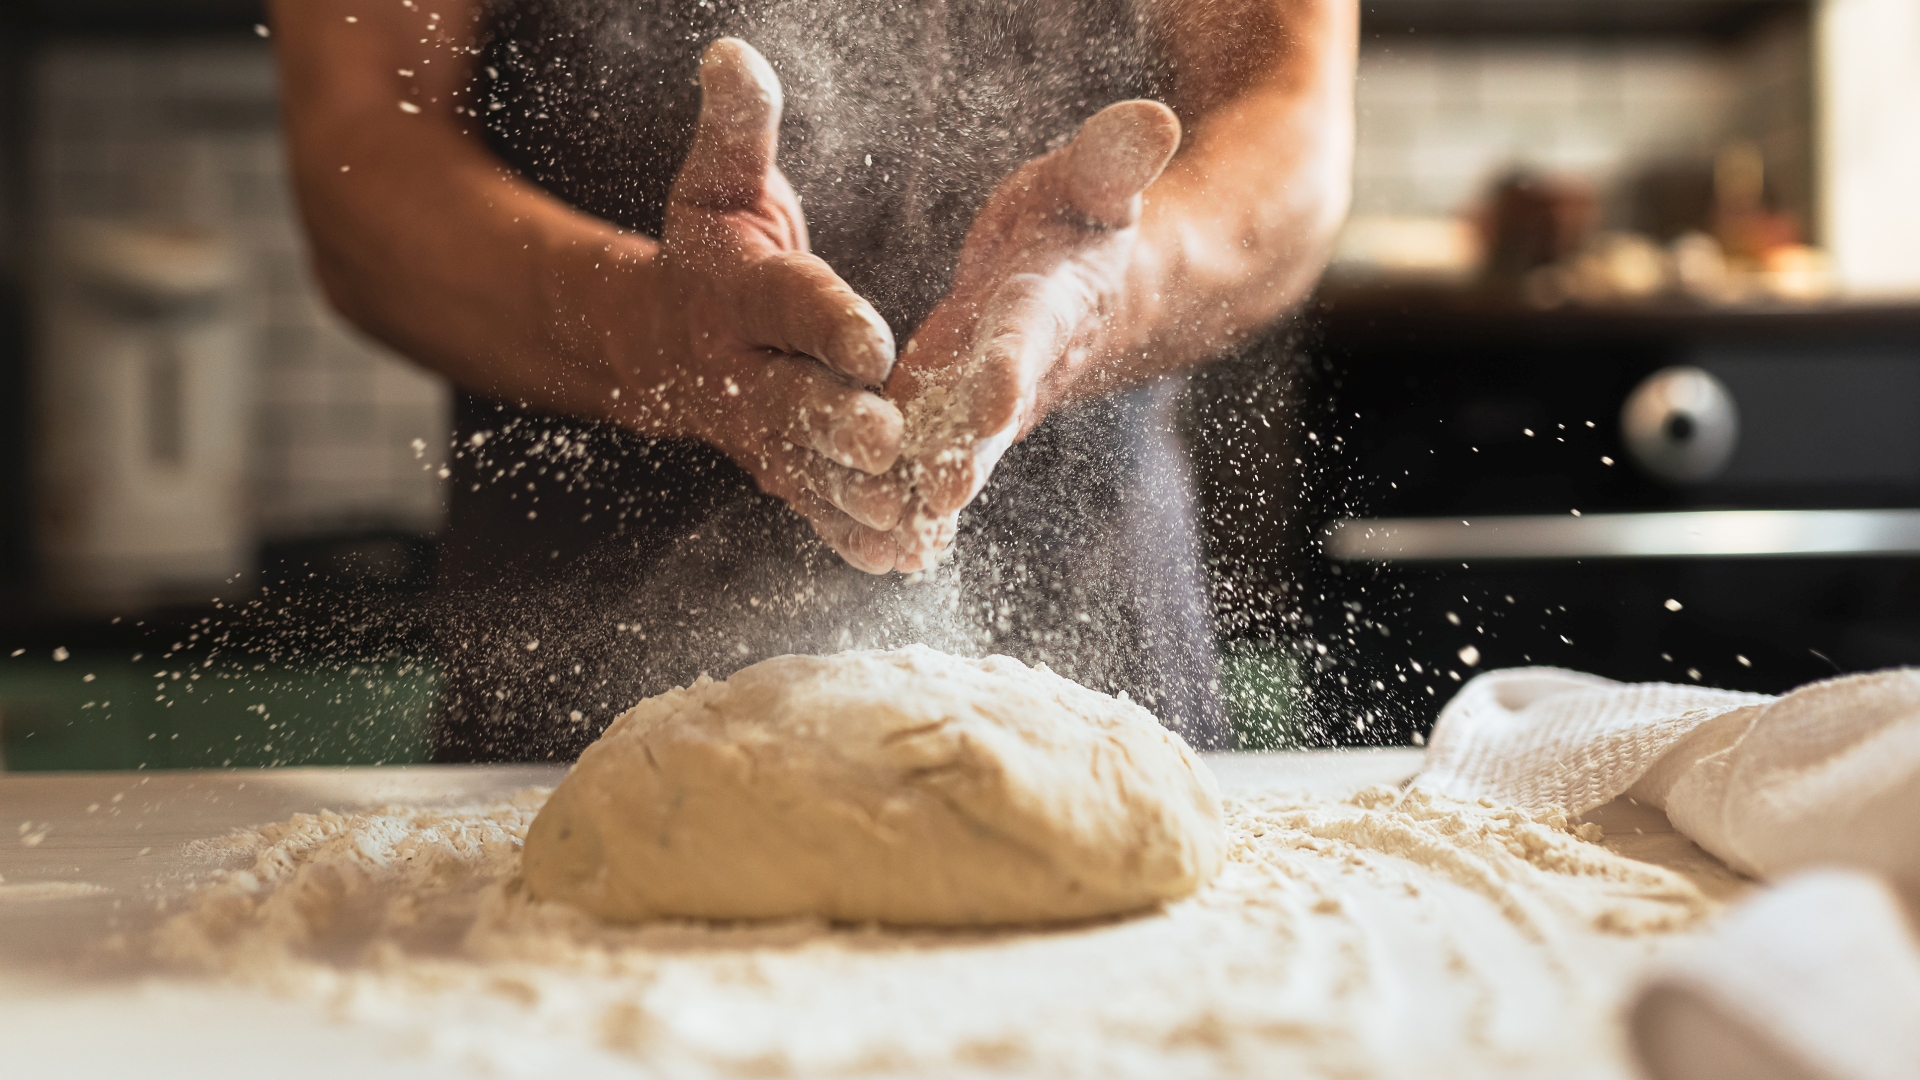 Chef’s hands spraying flour over the dough